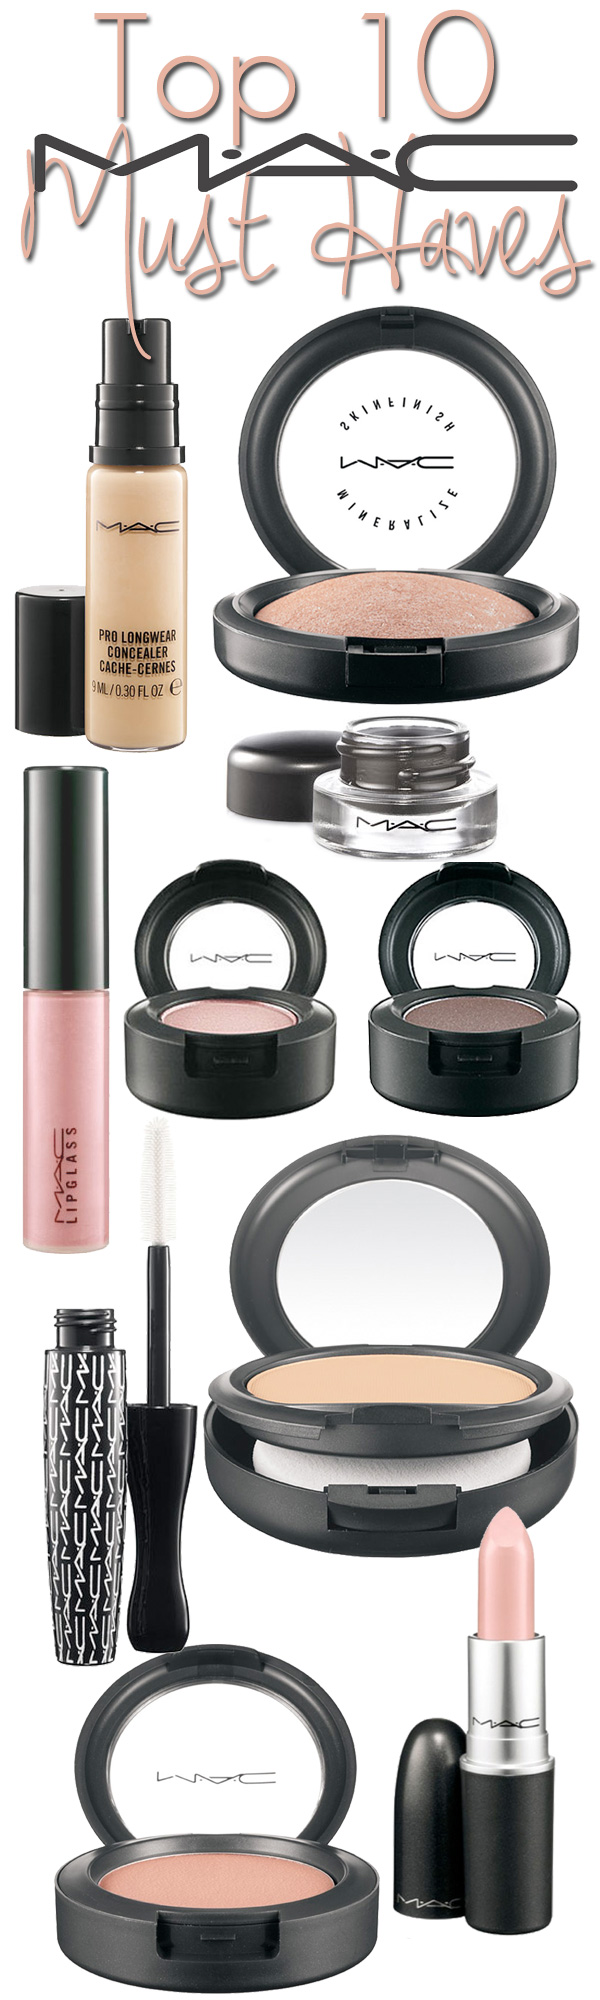 seksuel Compulsion styrte Top 10 MAC Cosmetics Must Haves. — Beautiful Makeup Search